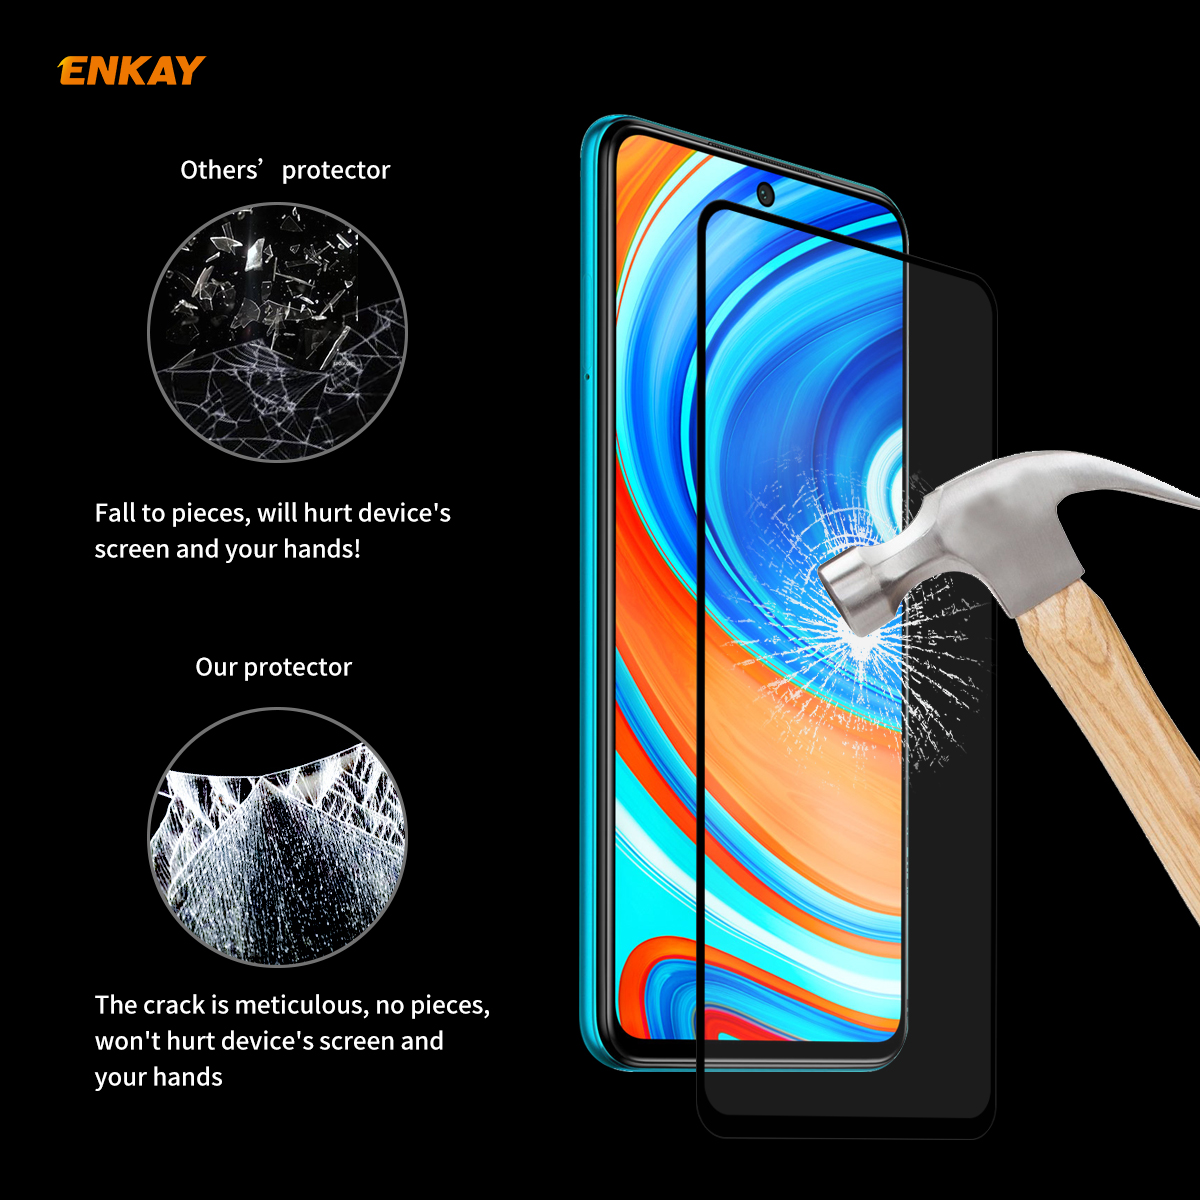 ENKAY-12510-Pcs-9H-Anti-Explosion-Tempered-Glass-Full-Glue-Full-Coverage-Screen-Protector-for-Xiaomi-1720562-5